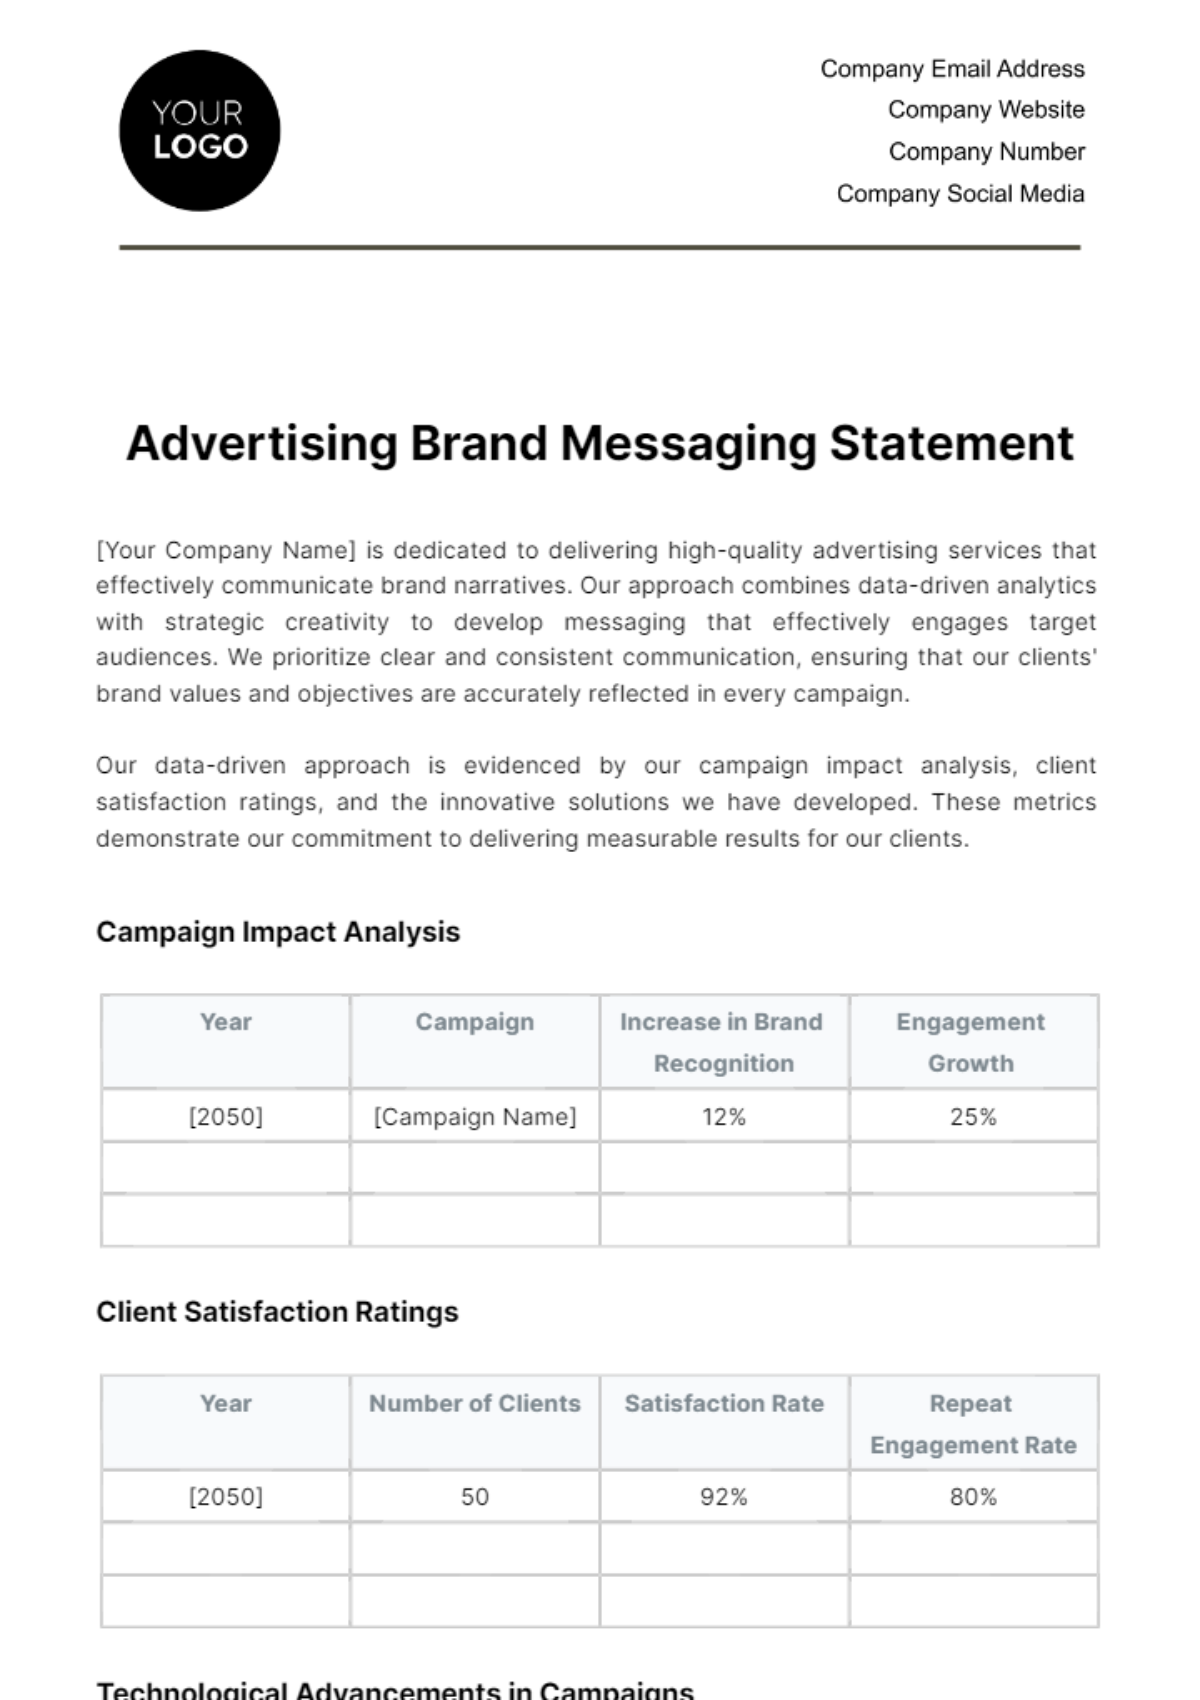 Free Advertising Brand Messaging Statement Template